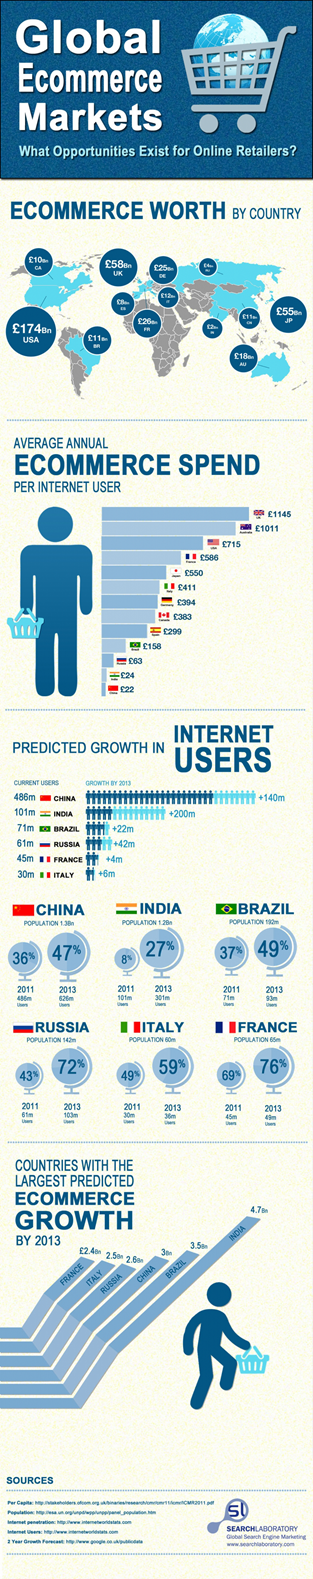 infographie ecommerce